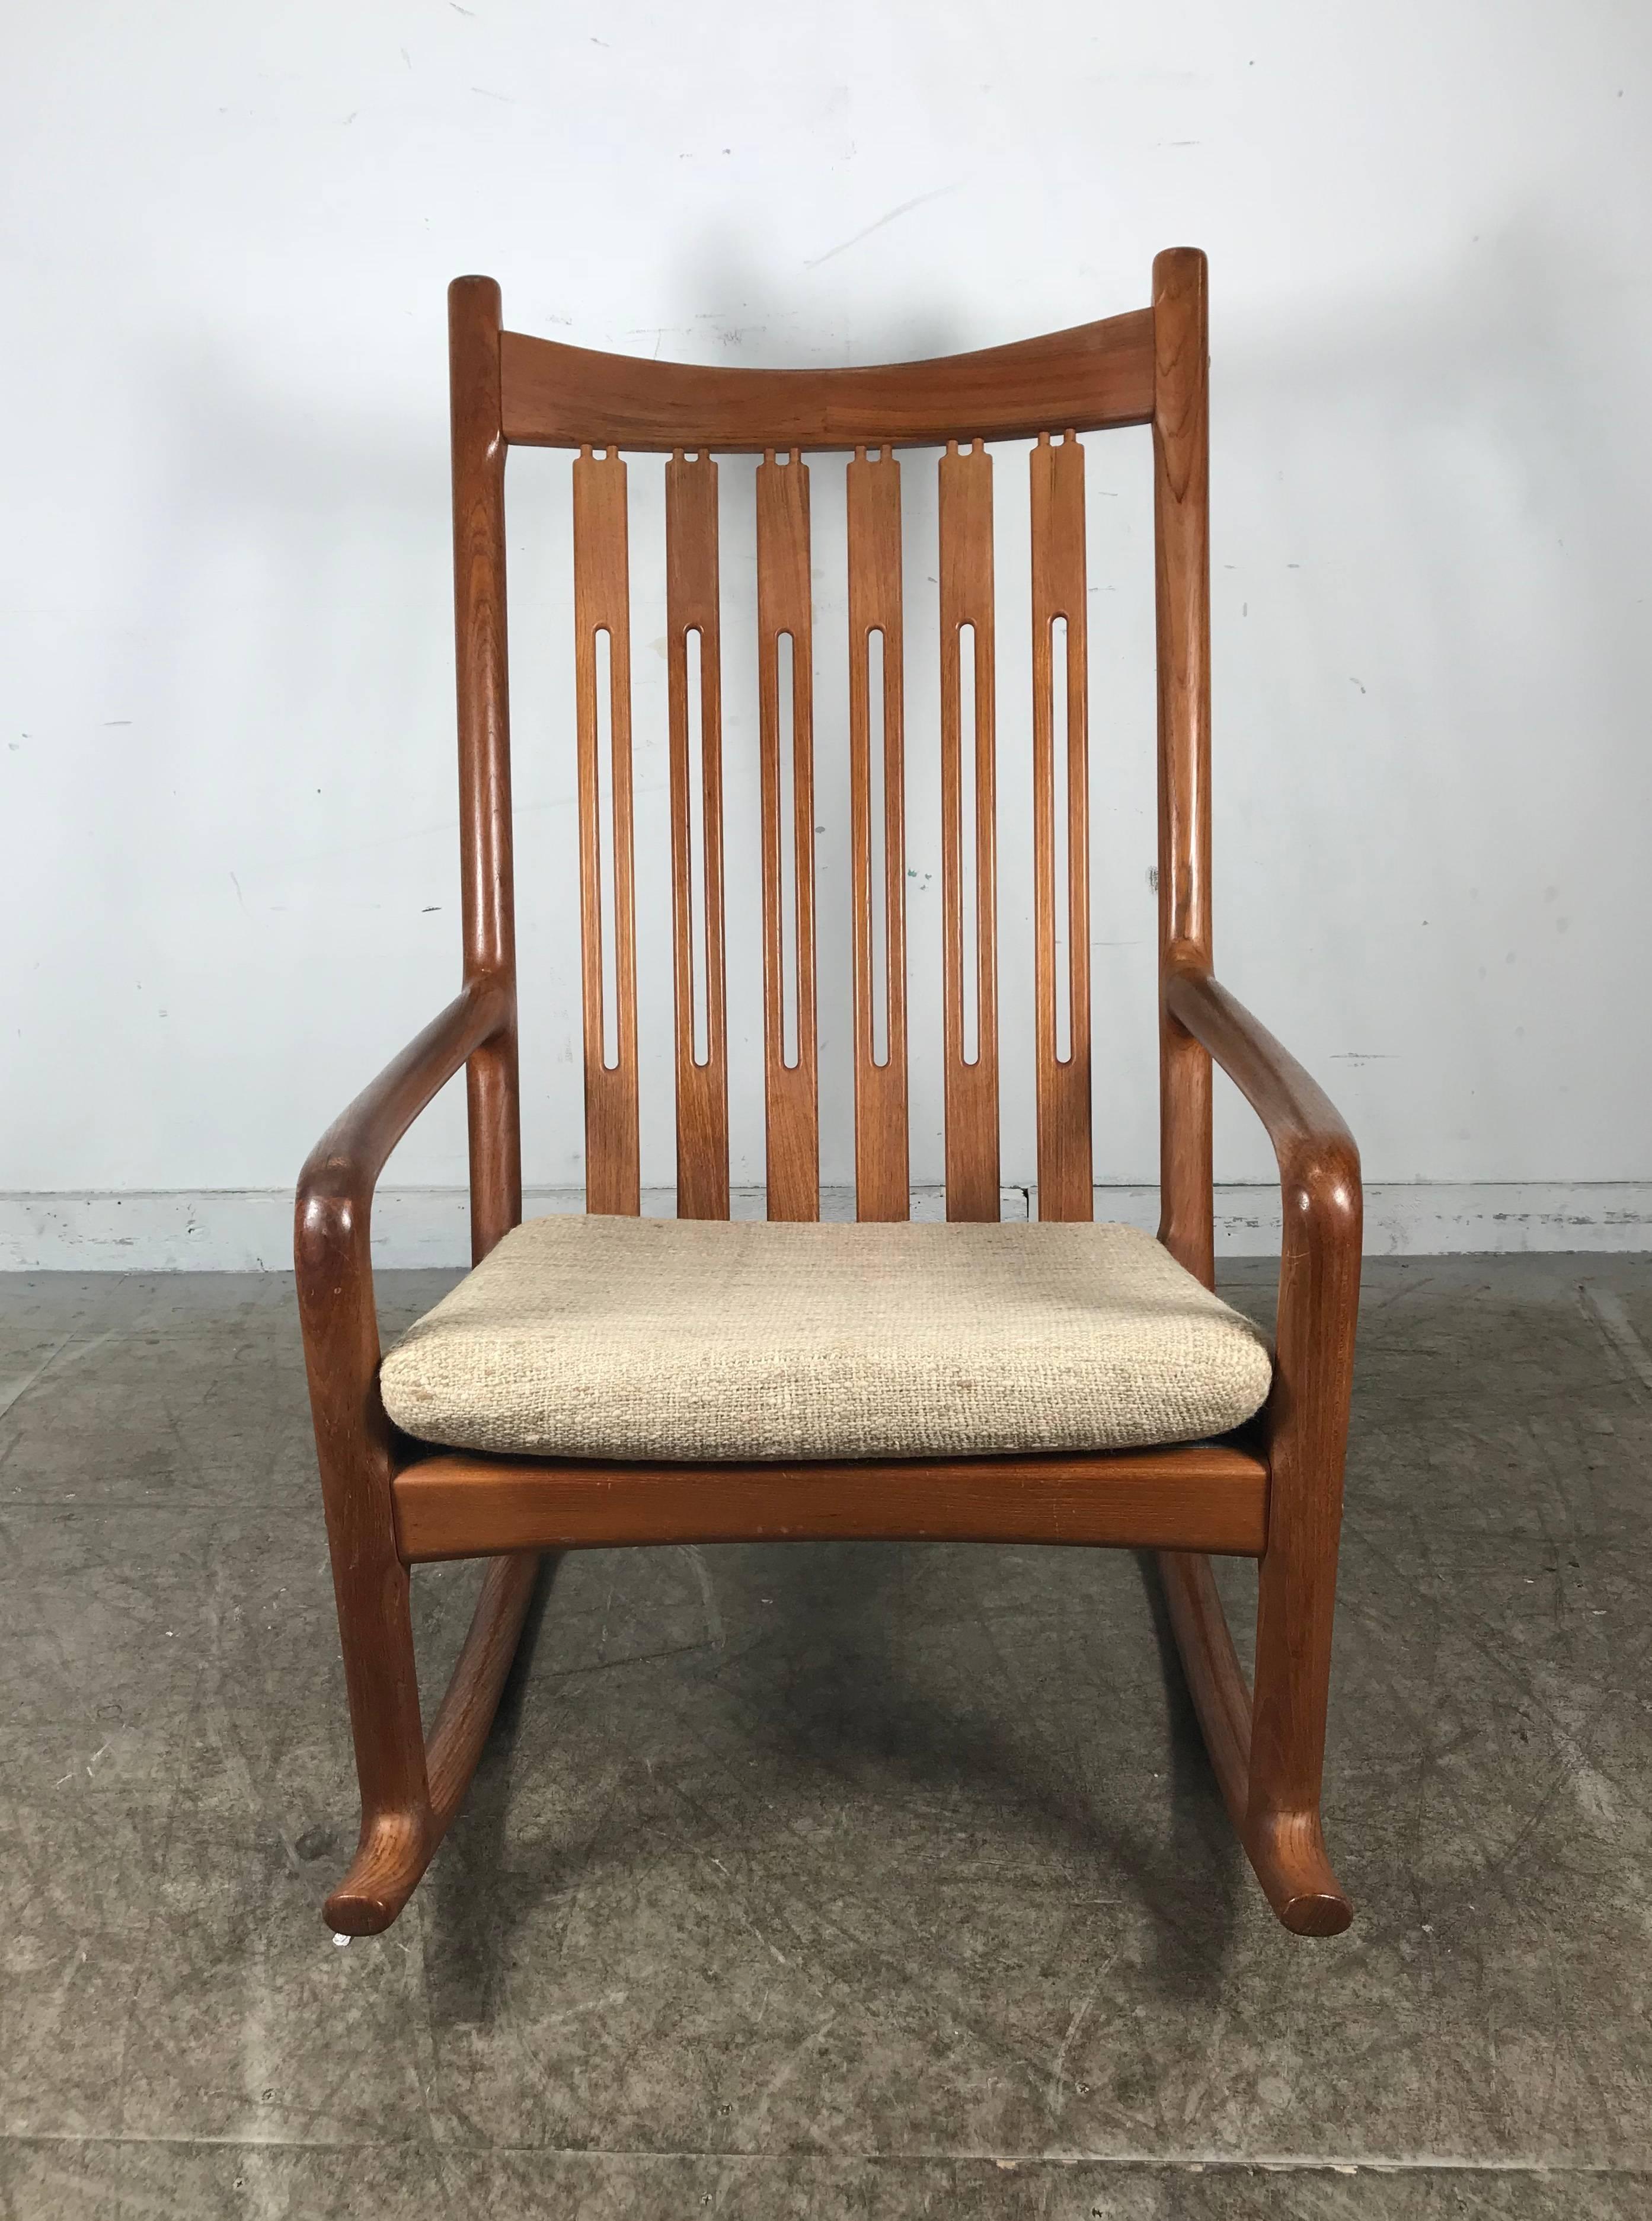 Sculpted teak rocking chair designed by Hans Olsen and made by Juul Kristensen.

Beautiful back detail and classic Danish craftsmanship. Bentwood arms and down cushion provide superb comfort.

Chair is in excellent condition with minimal signs